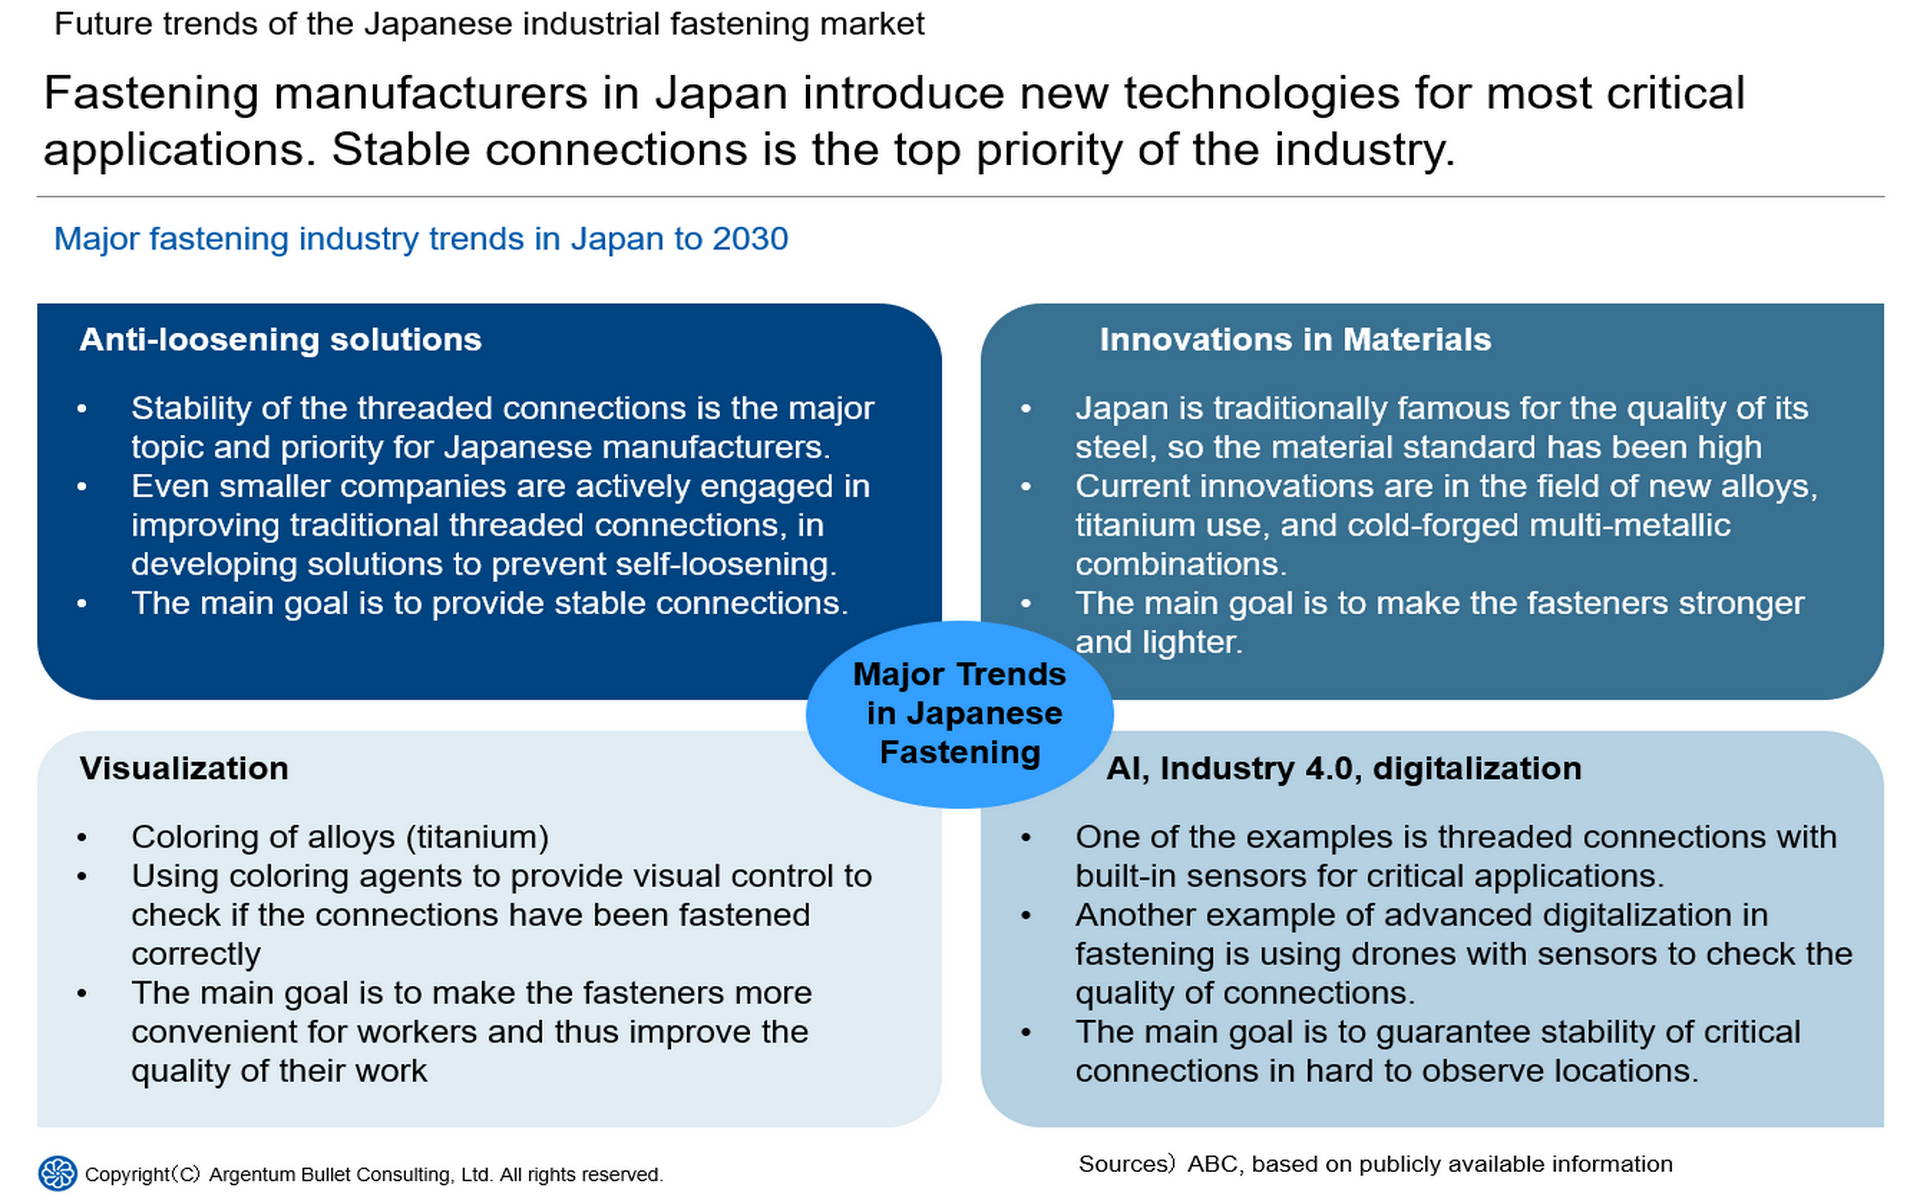 Industrial fastening technological trends in Japan